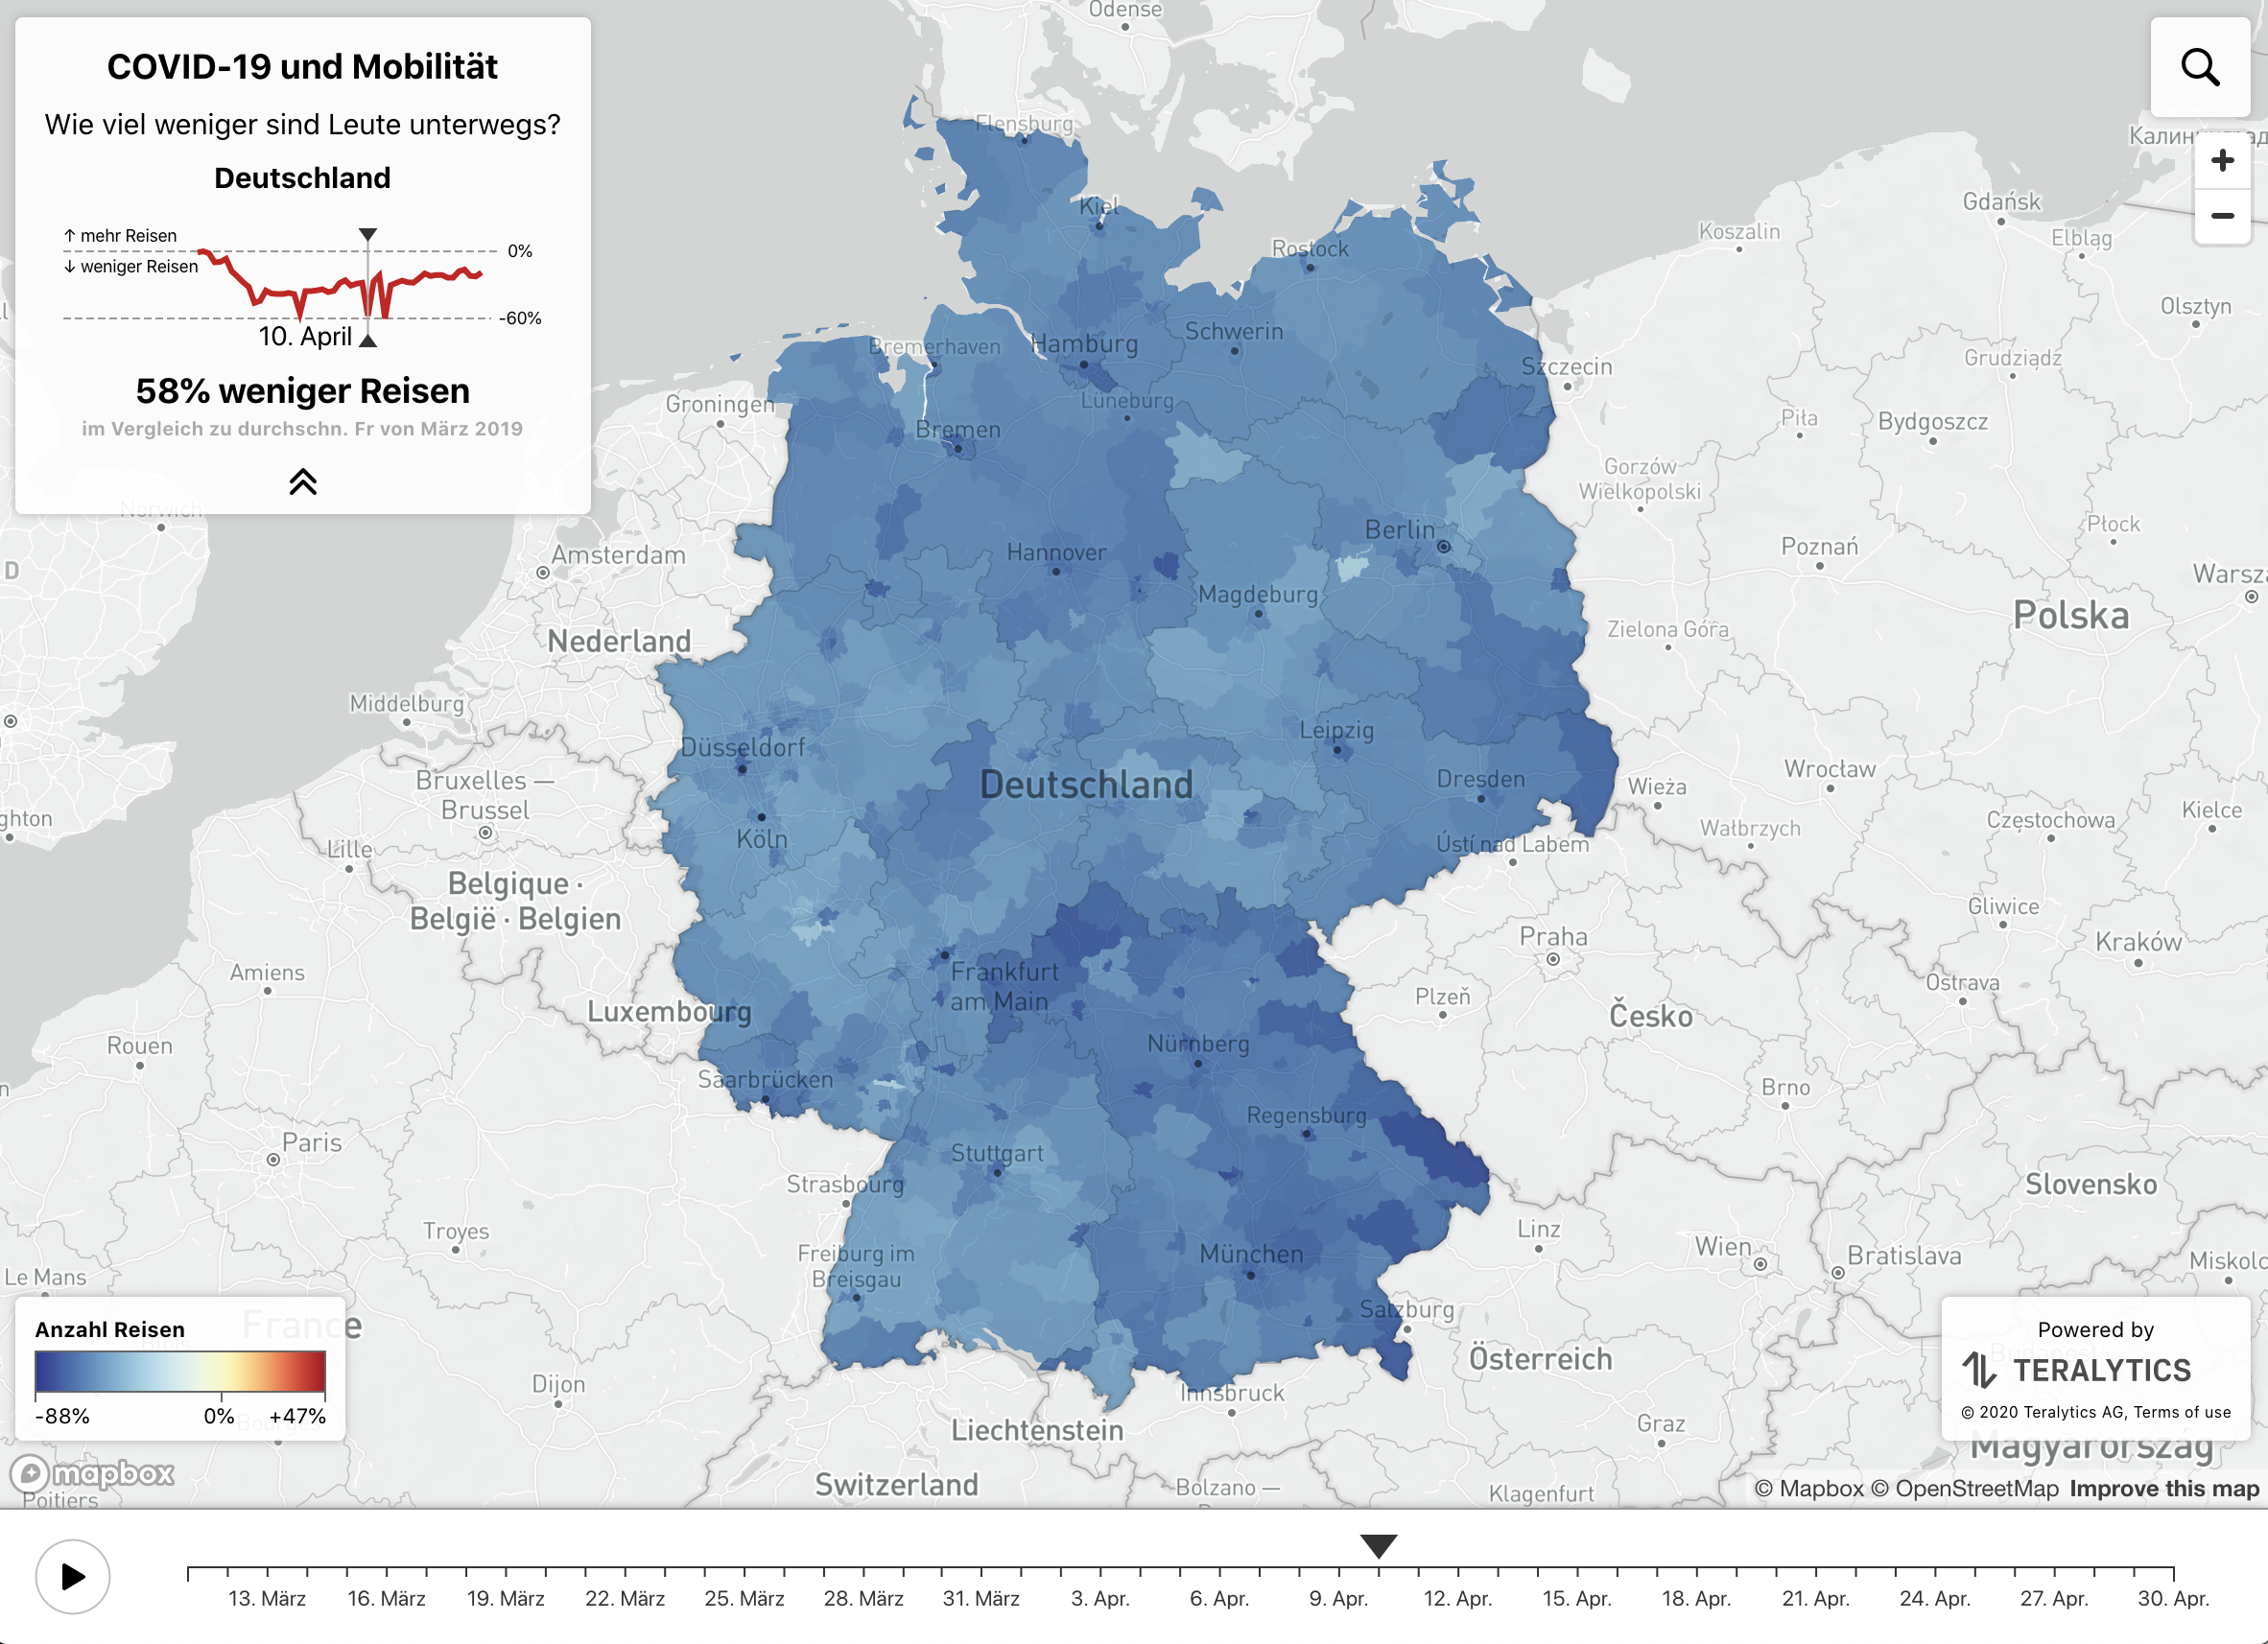 Effect of COVID-19 on mobility in Germany